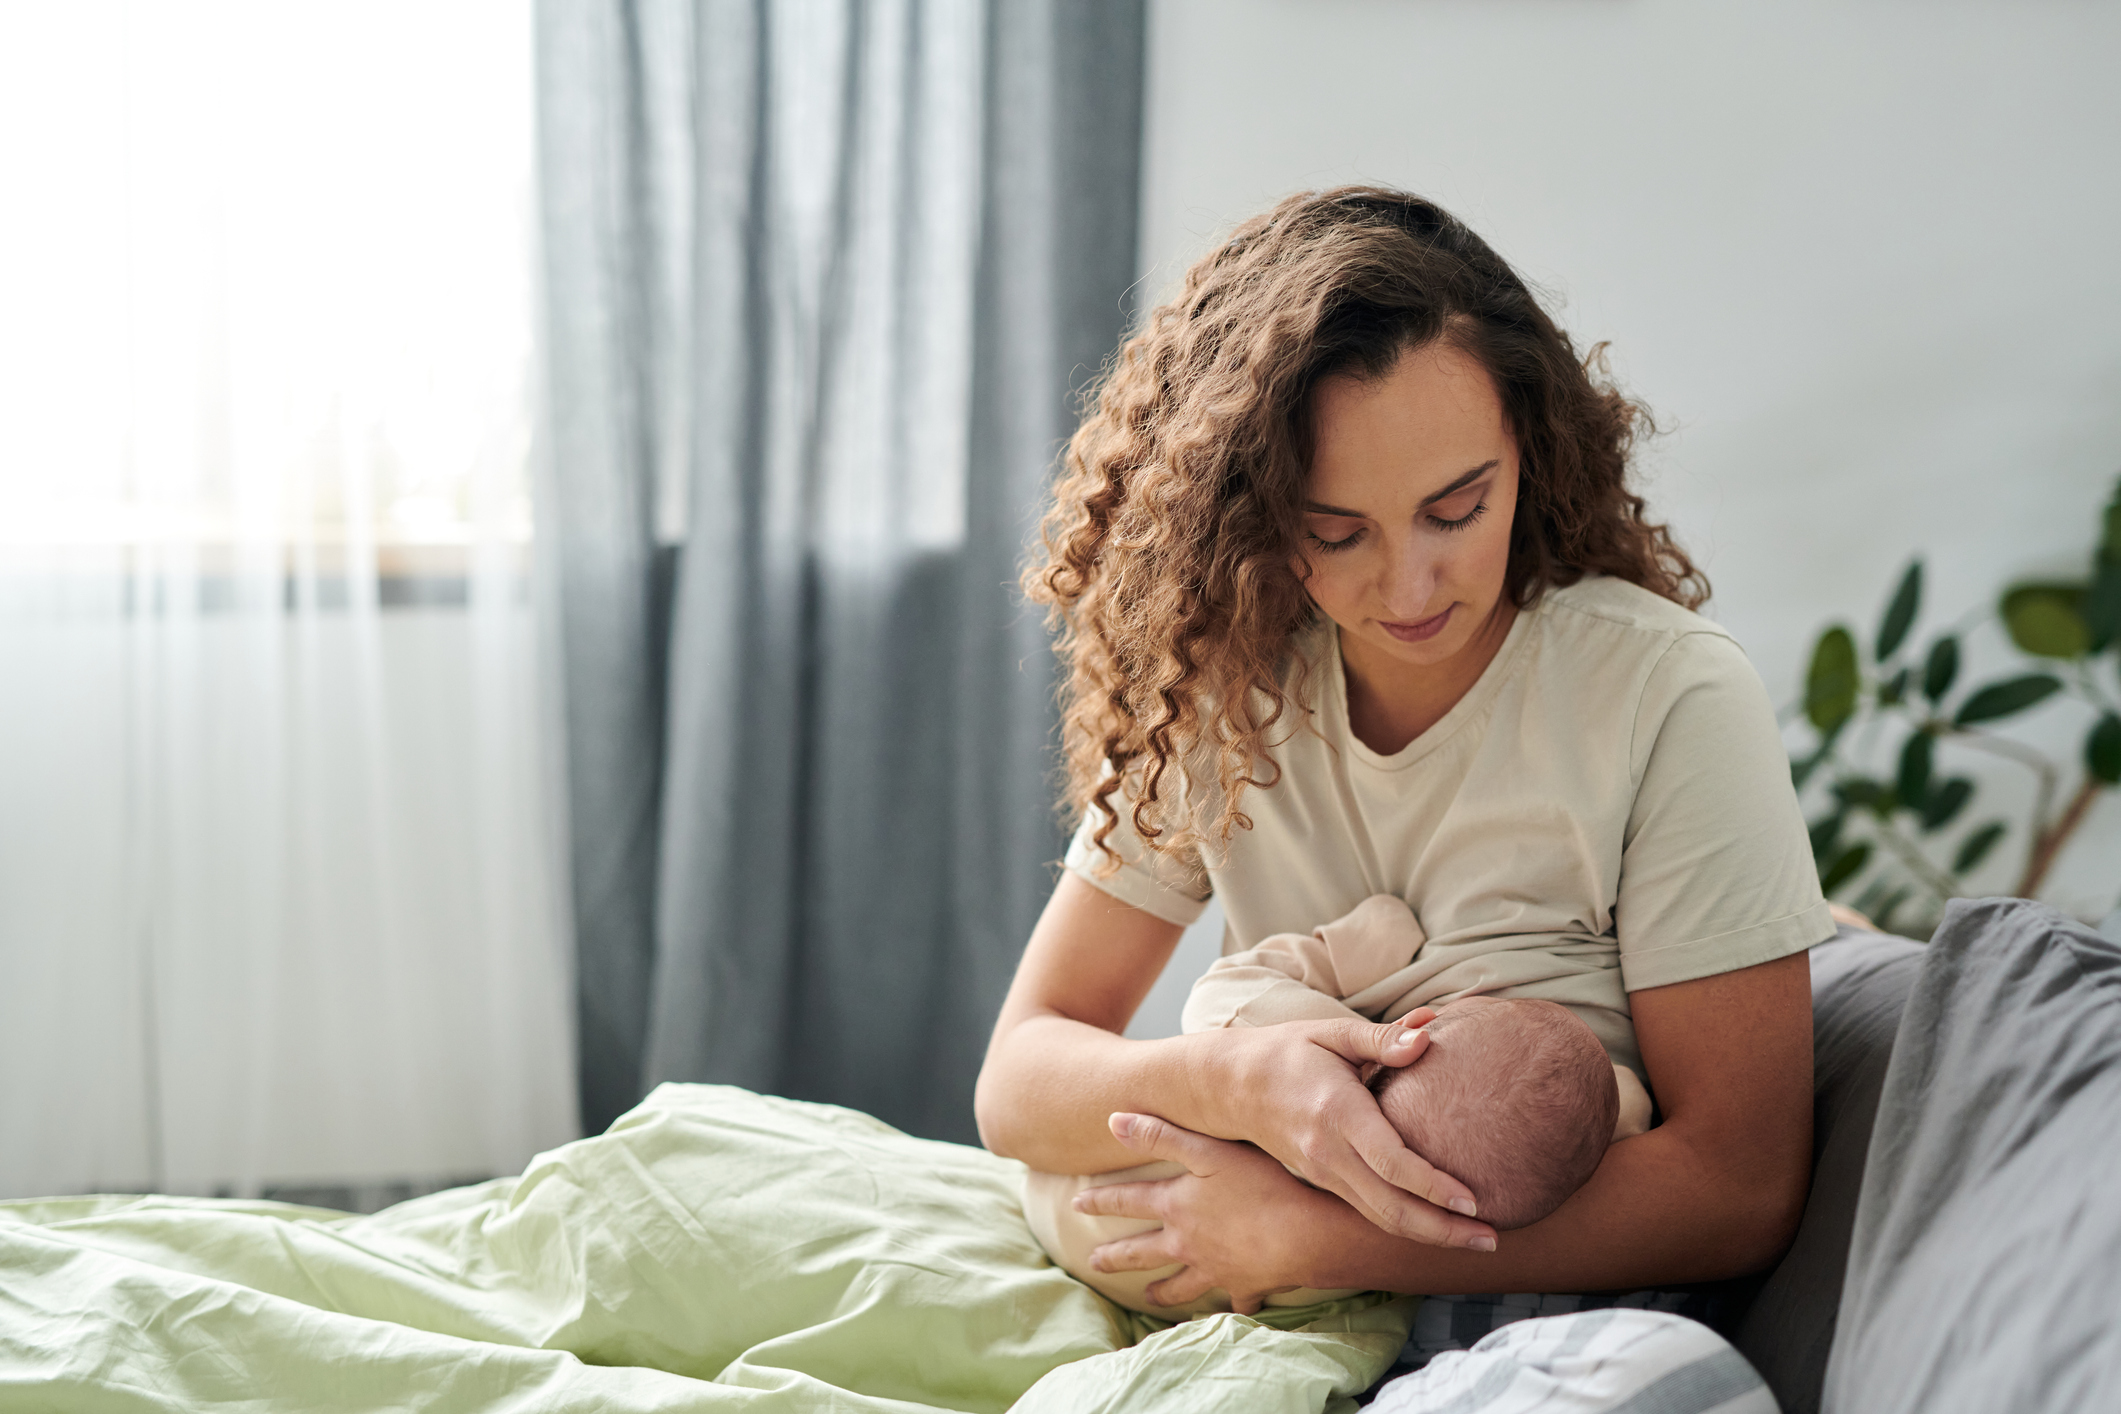 Lactation coverage not enforced in ACA